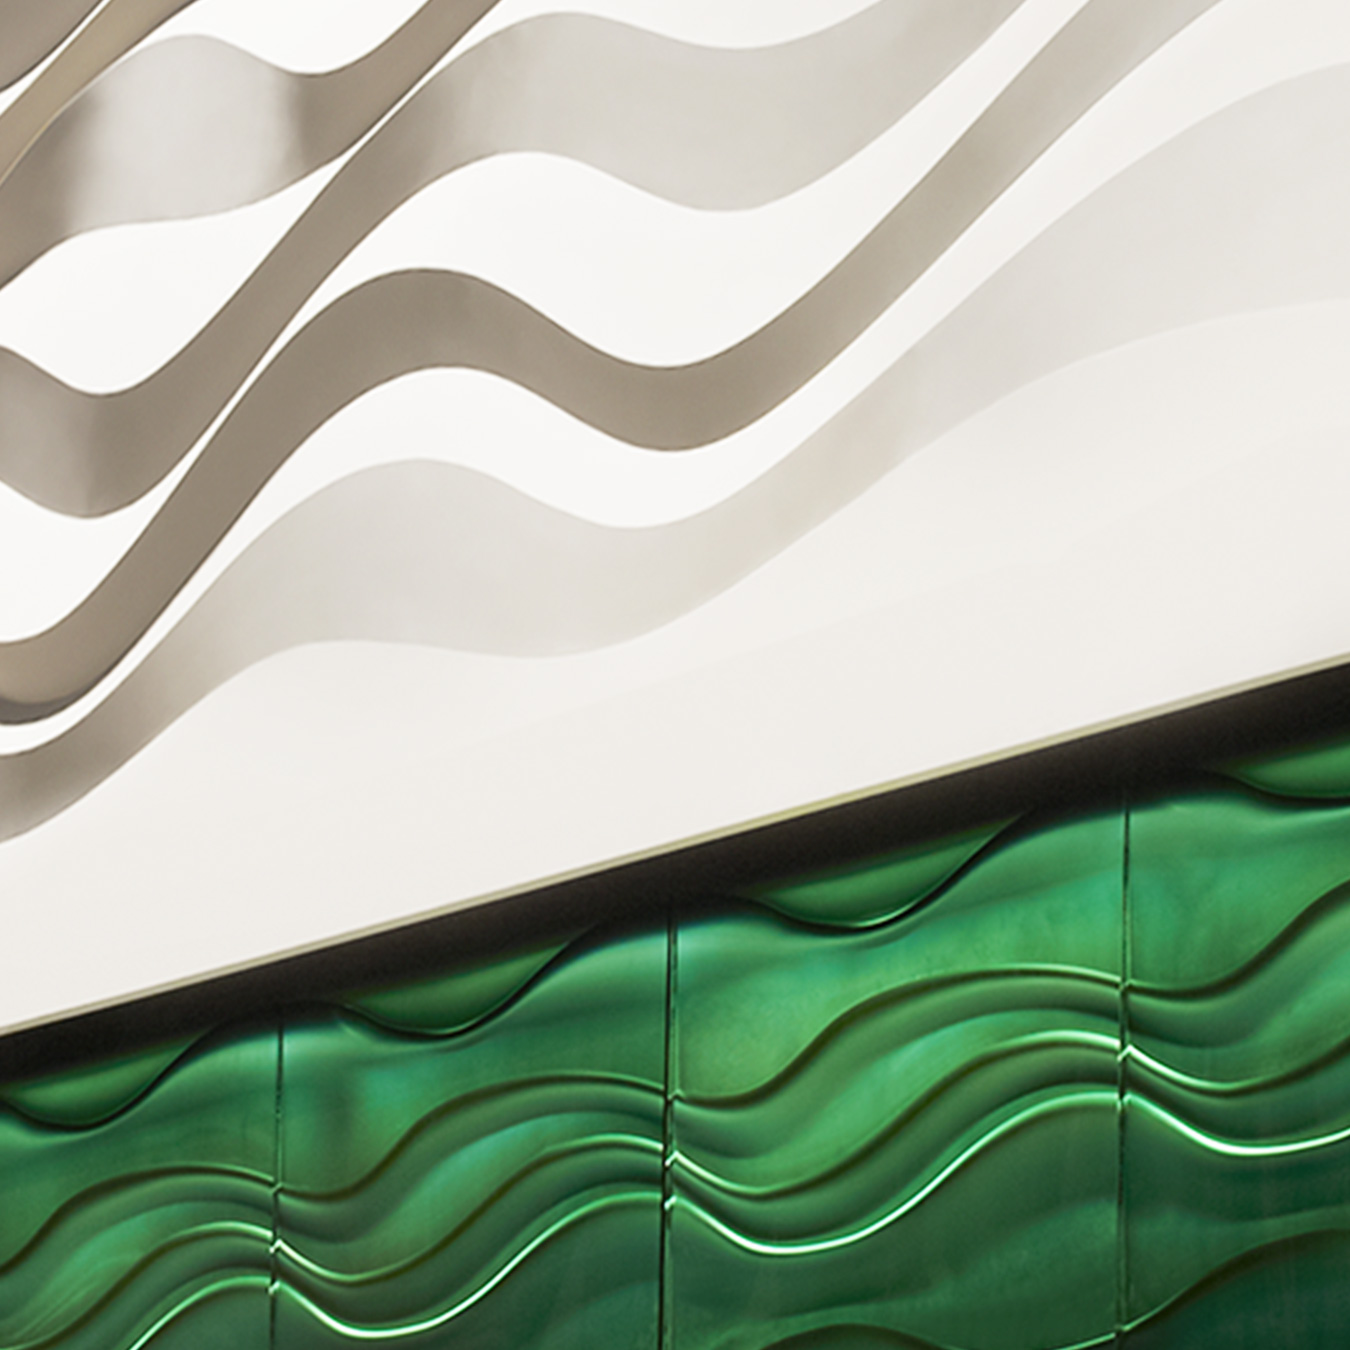 Abstract Green Waves Image